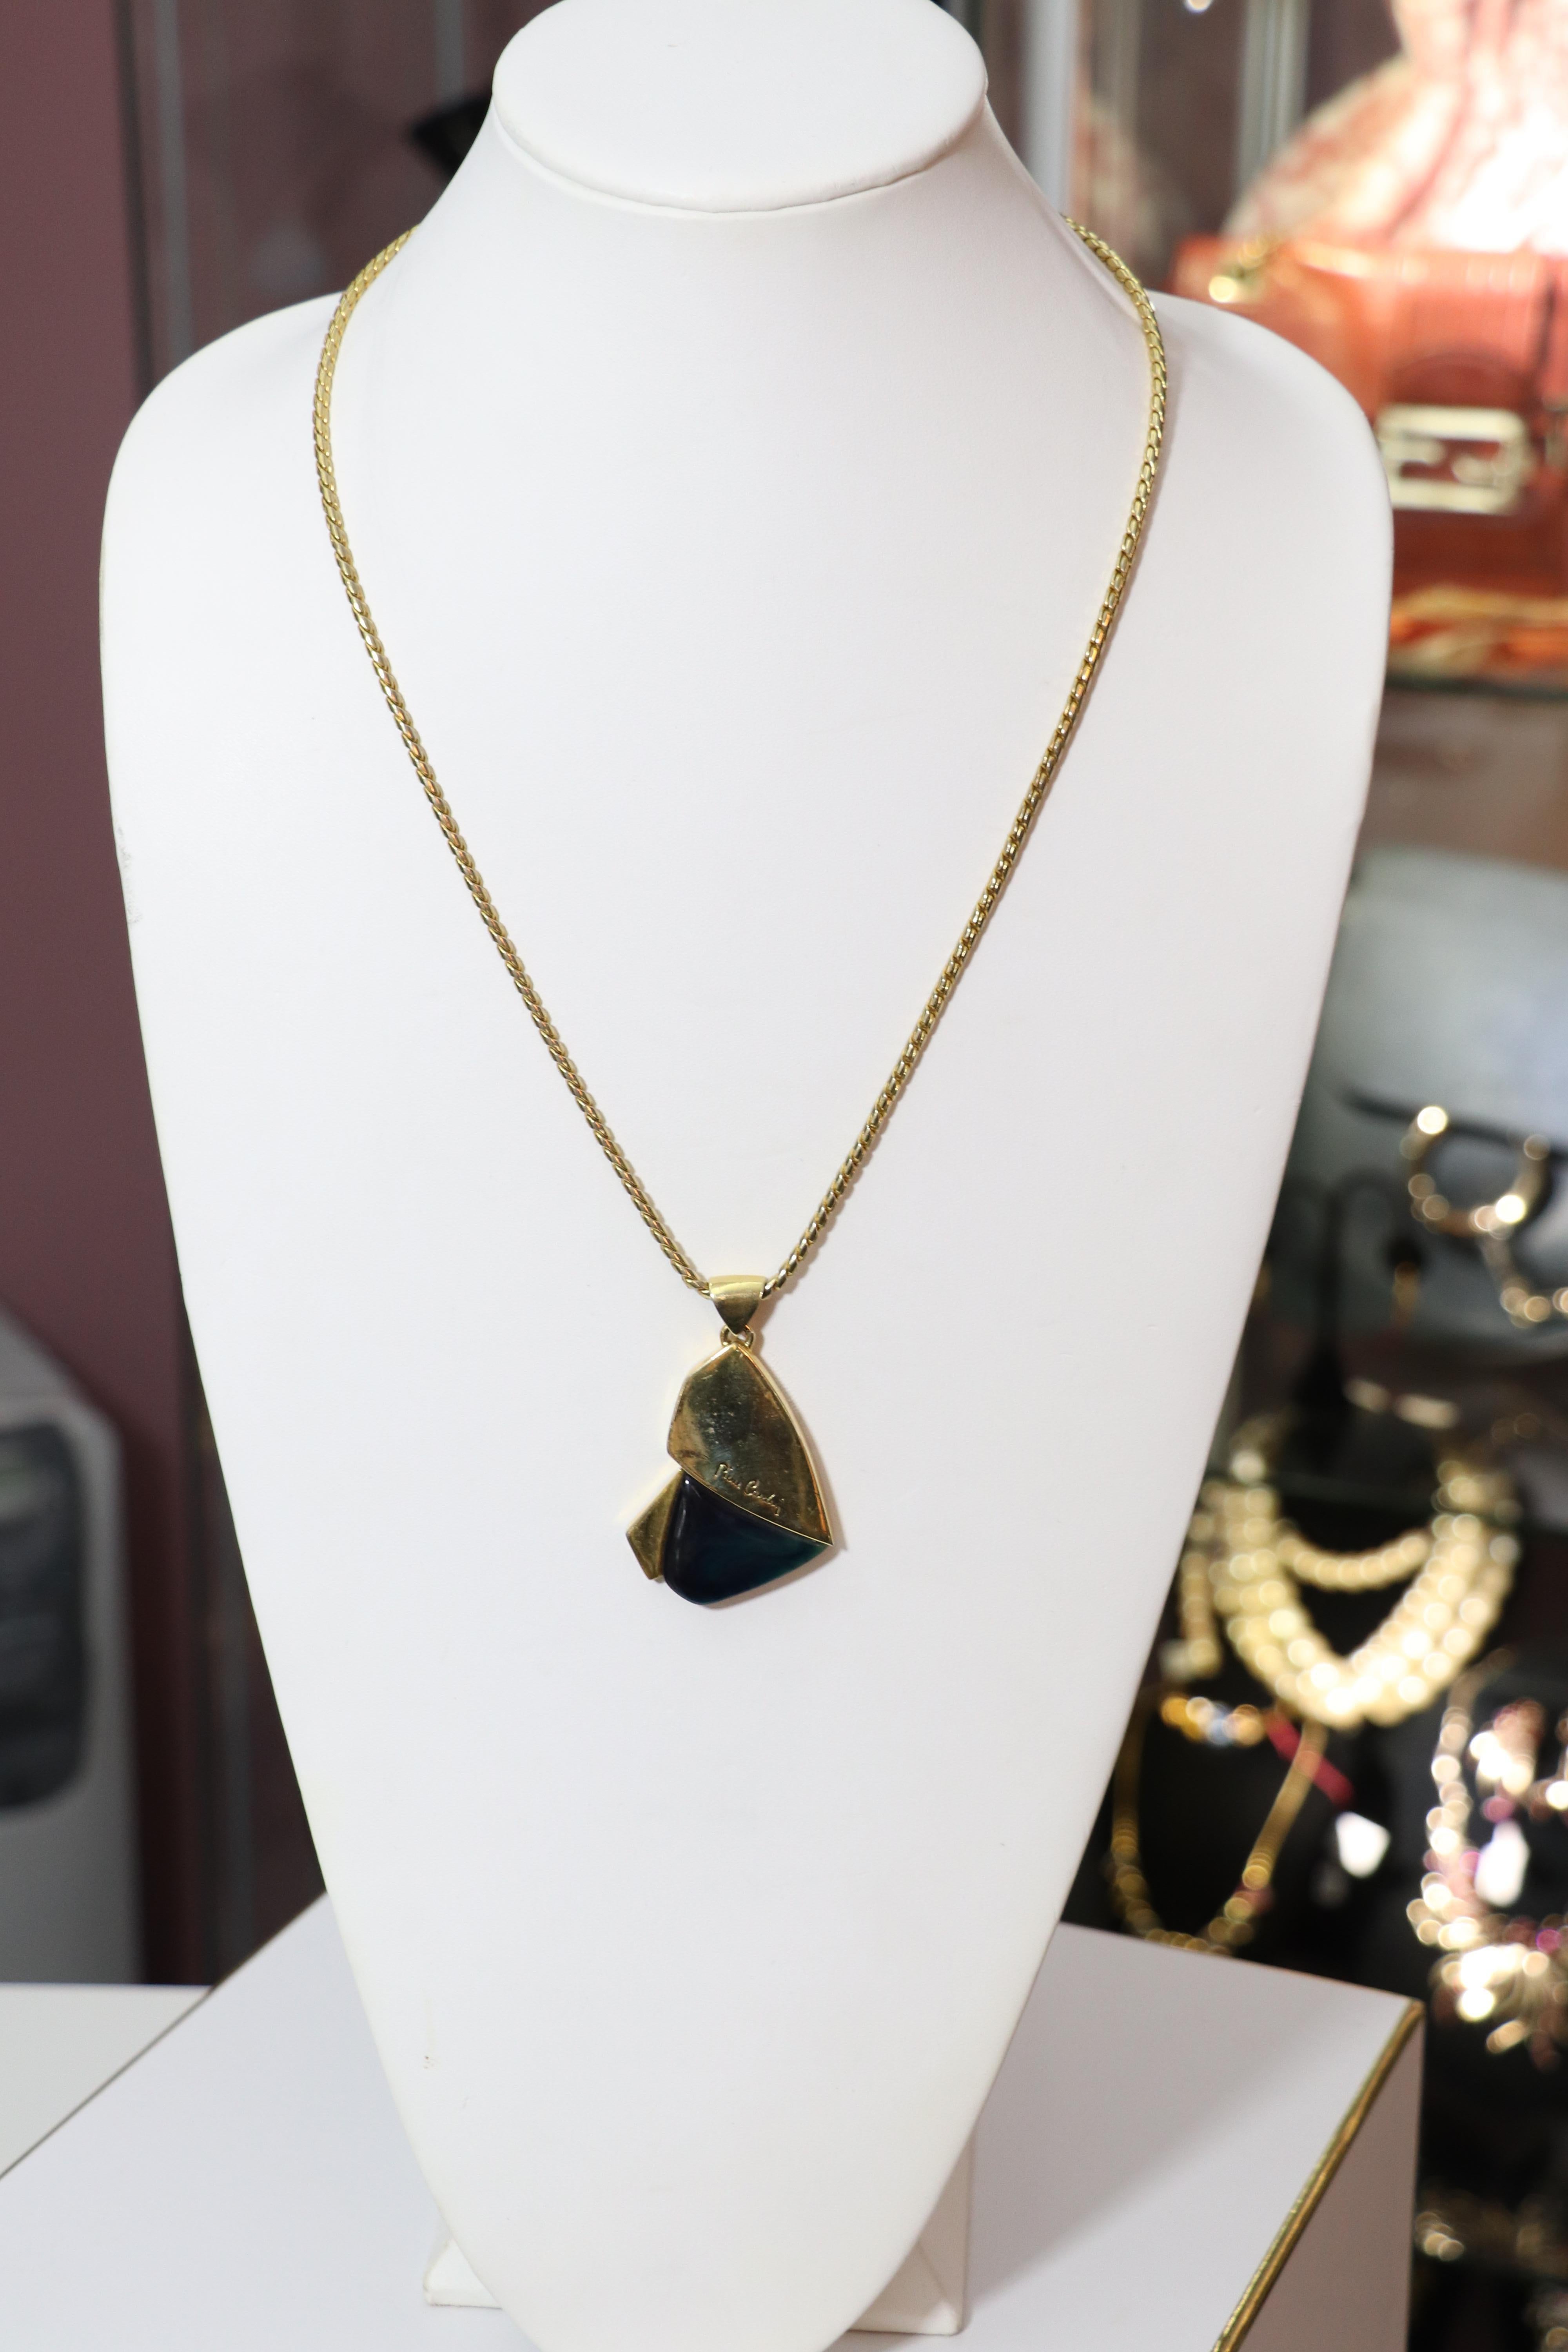 Pierre Cardin modernist pendant necklace features gold-tone hardware with a navy and blue marbled lucite detail and signature. Pendant is on its original chain with a small Pierre Cardin logo motif at the spring ring clasp